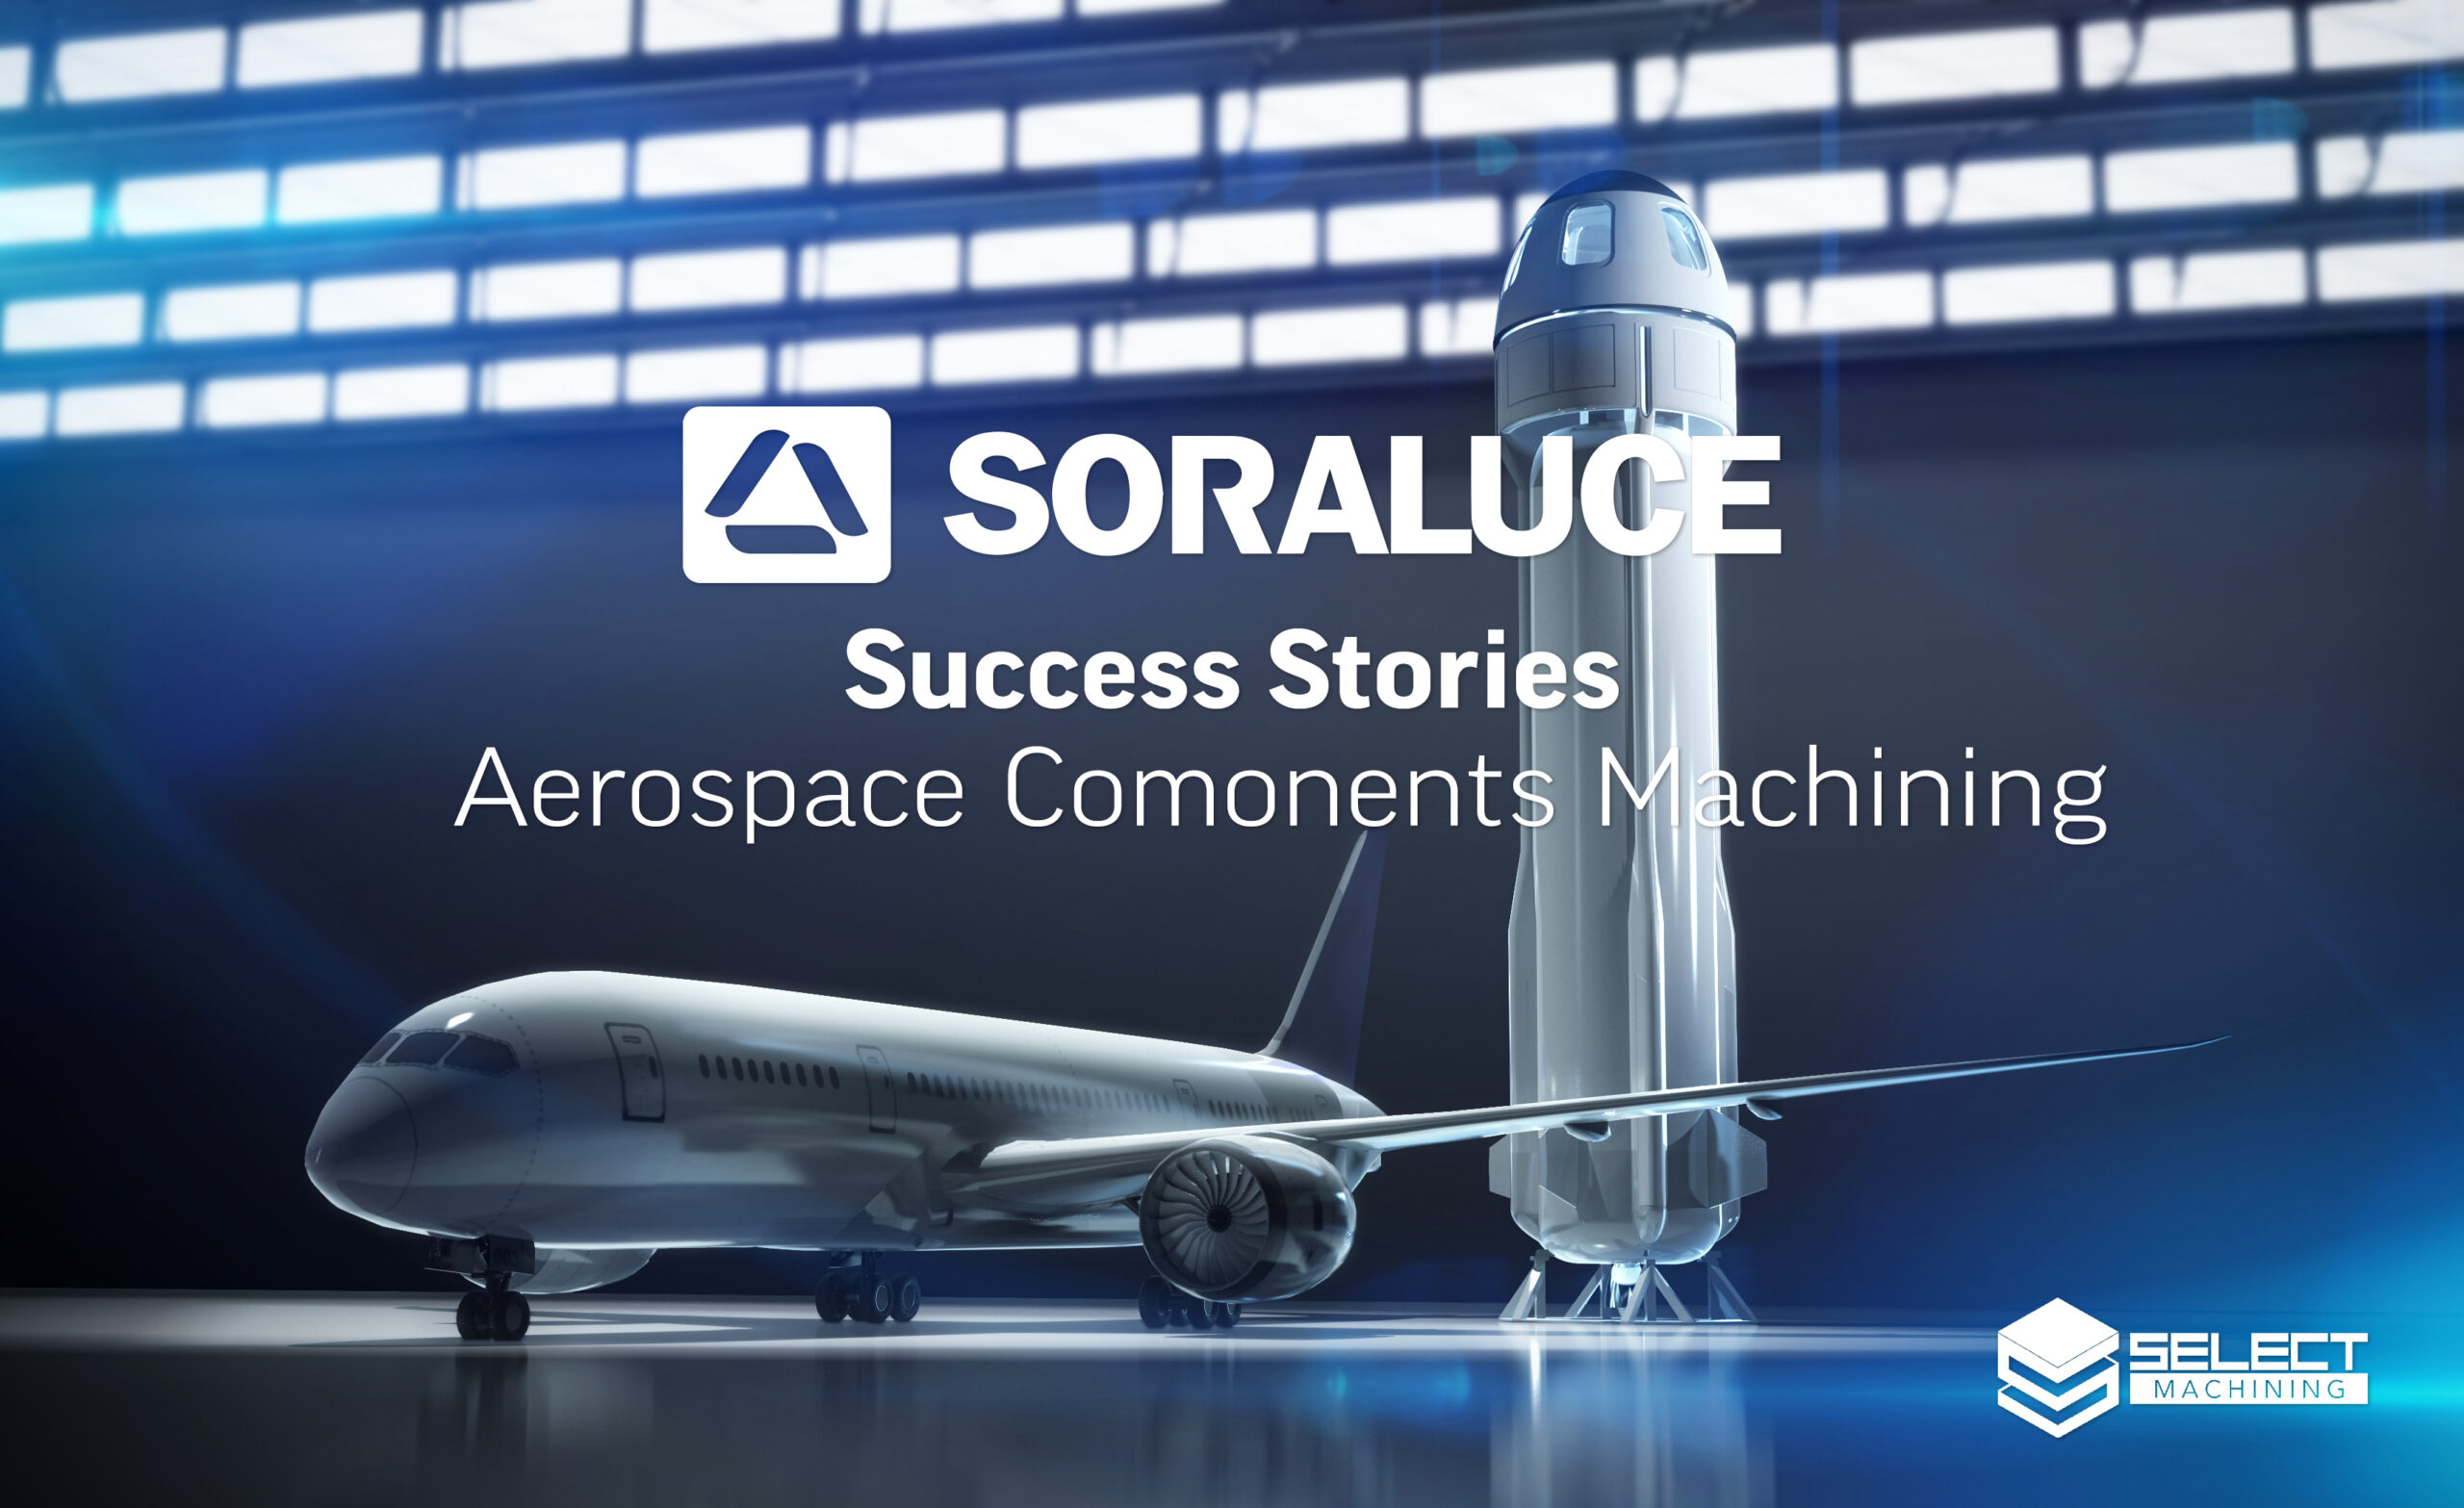 CNC Machining Webinar focused on manufacturing technology solutions for machining components in jet aircraft, air frames, landing gear, rocket engines and other aerospace industry applications